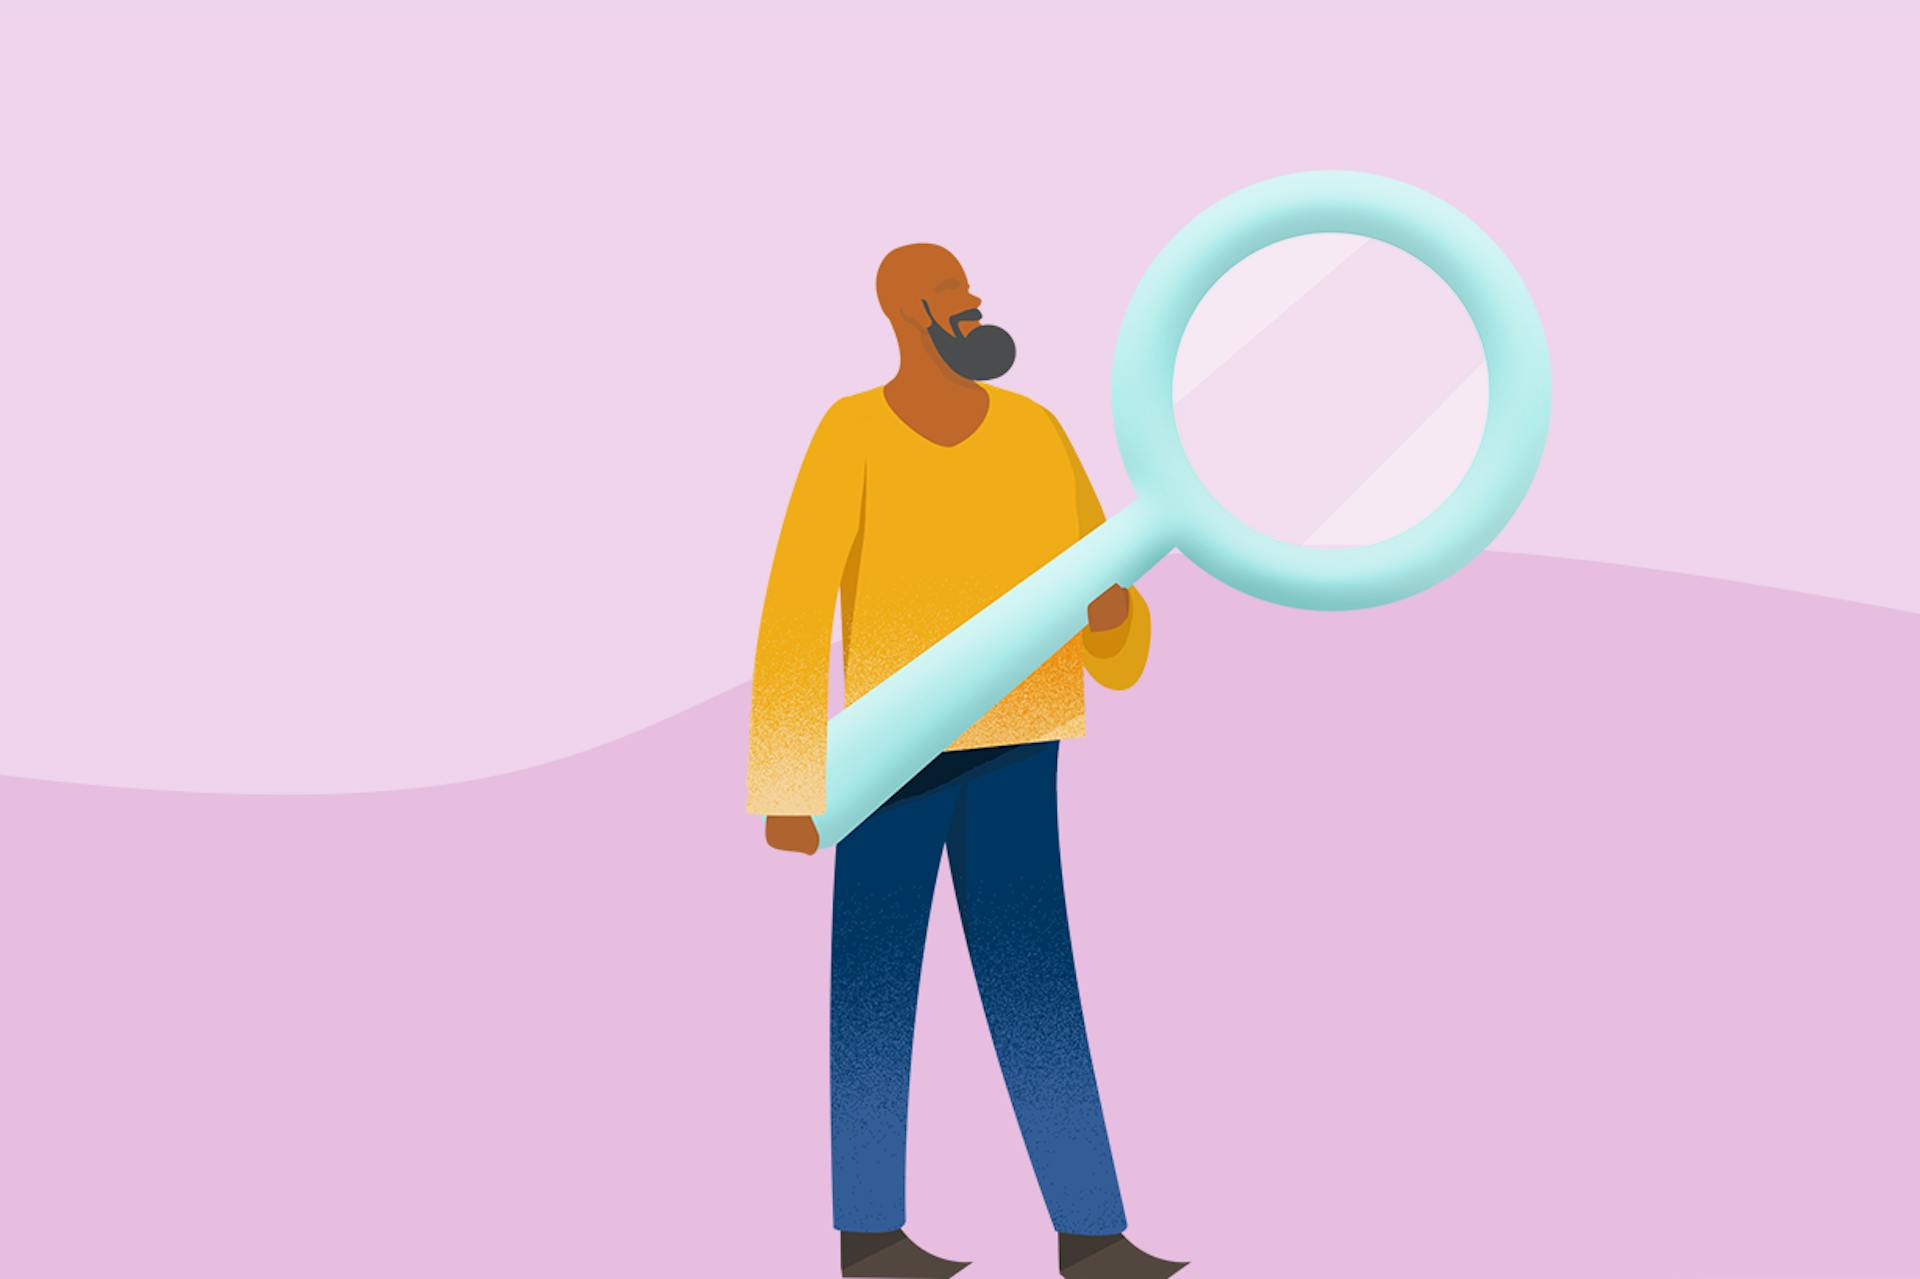 Looking for an alternative social media management solution? This image of a man holding a giant magnifying glass represents how monumental that search can feel. In this blog, we explore alternative social media solutions to Sprinklr.